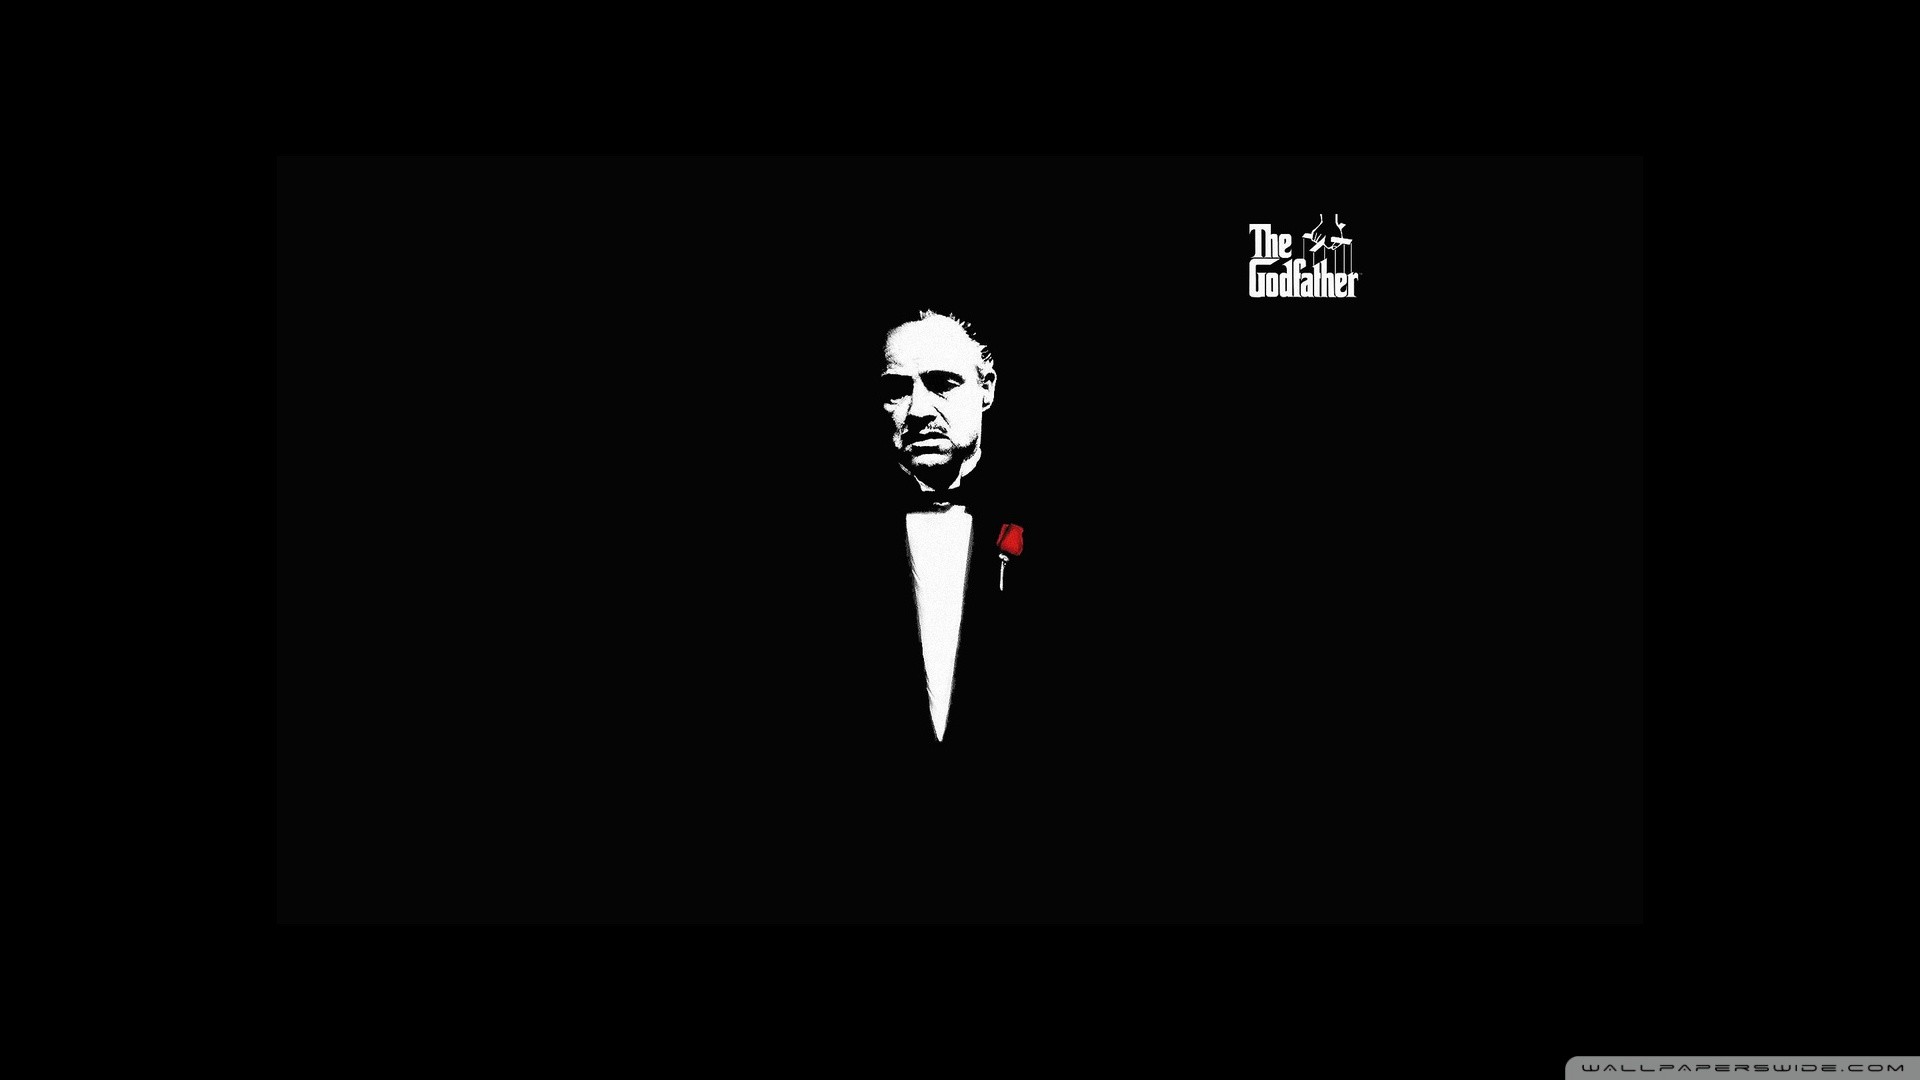 The Godfather Wallpapers.